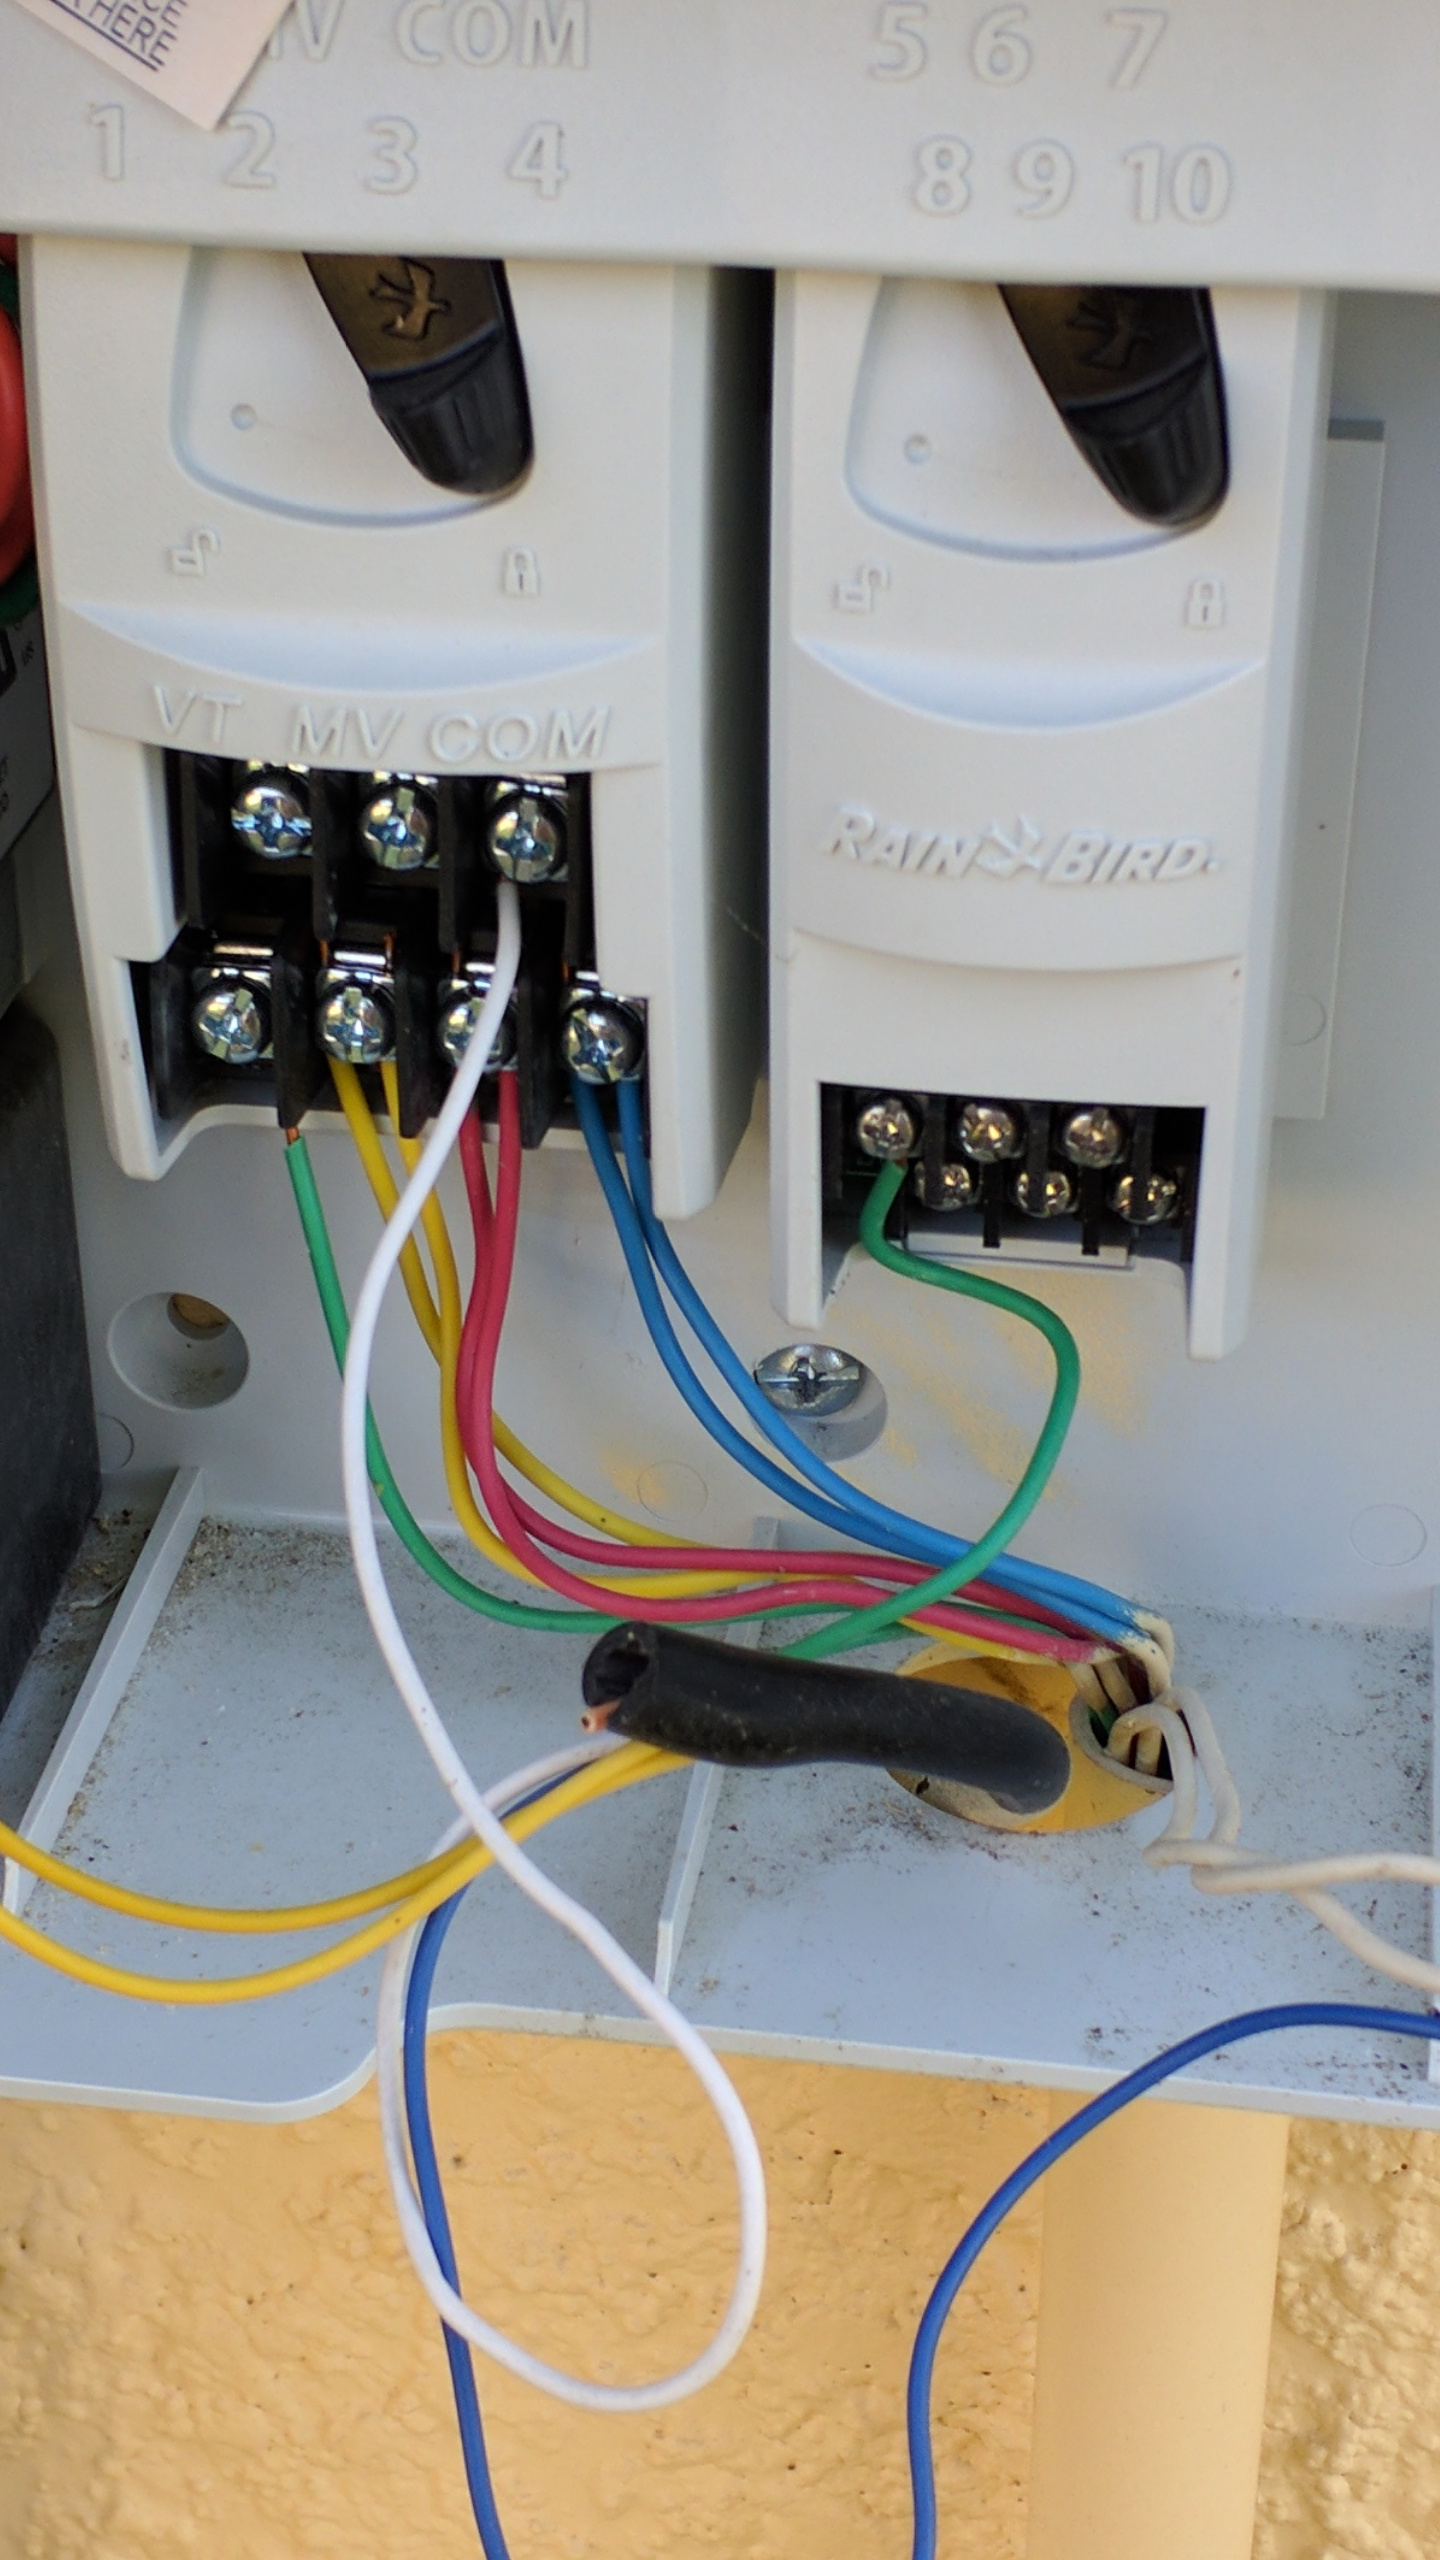 Upgrading from a rainbird esp-me controller with 2 wires per zone